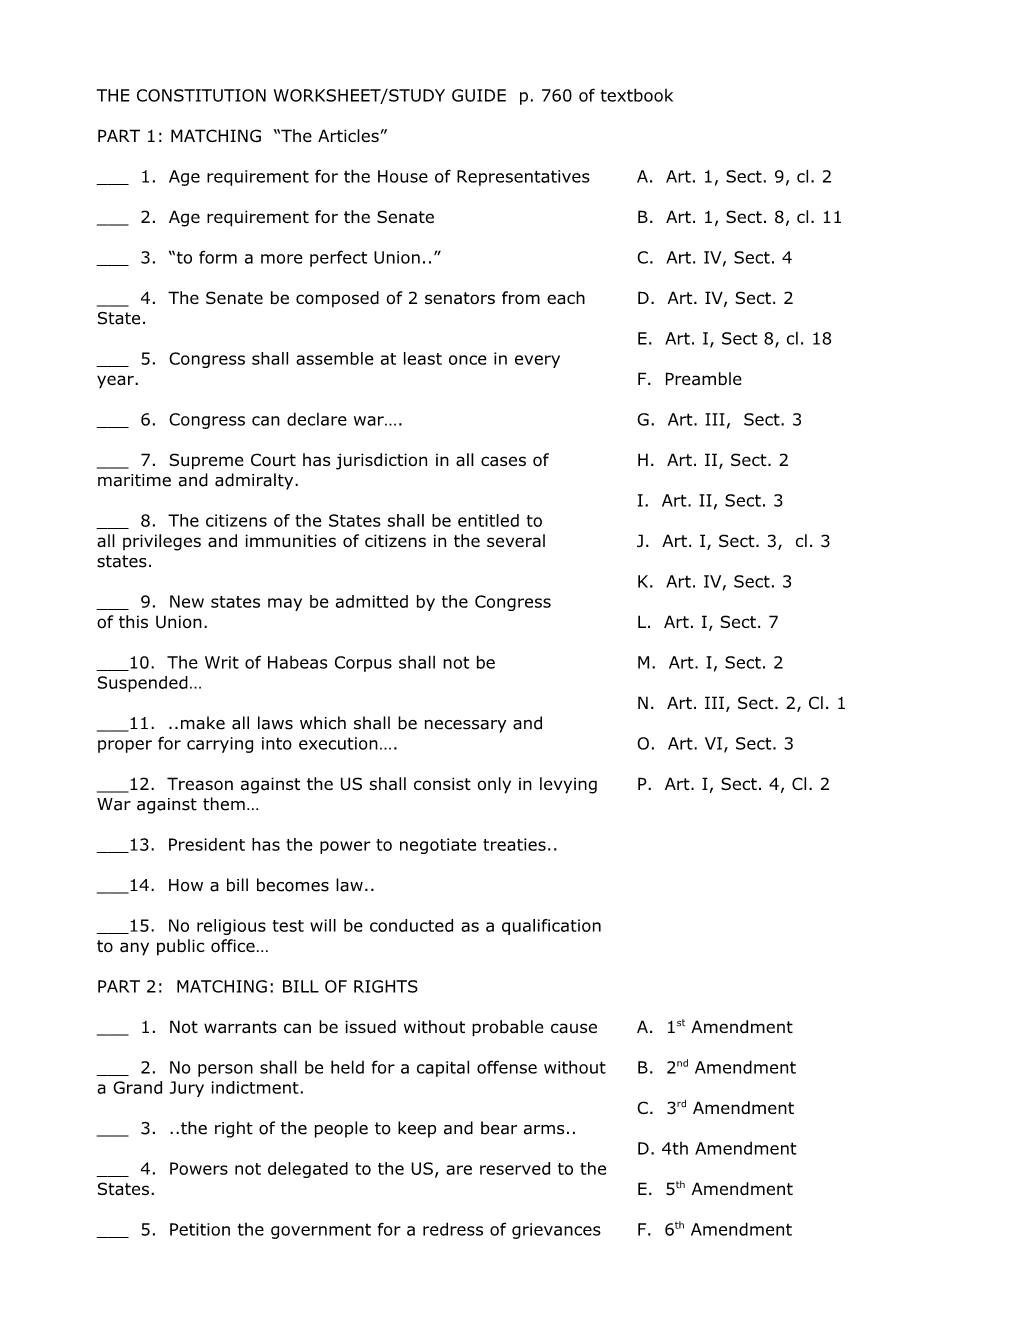 The Constitution Worksheet/Study Guide